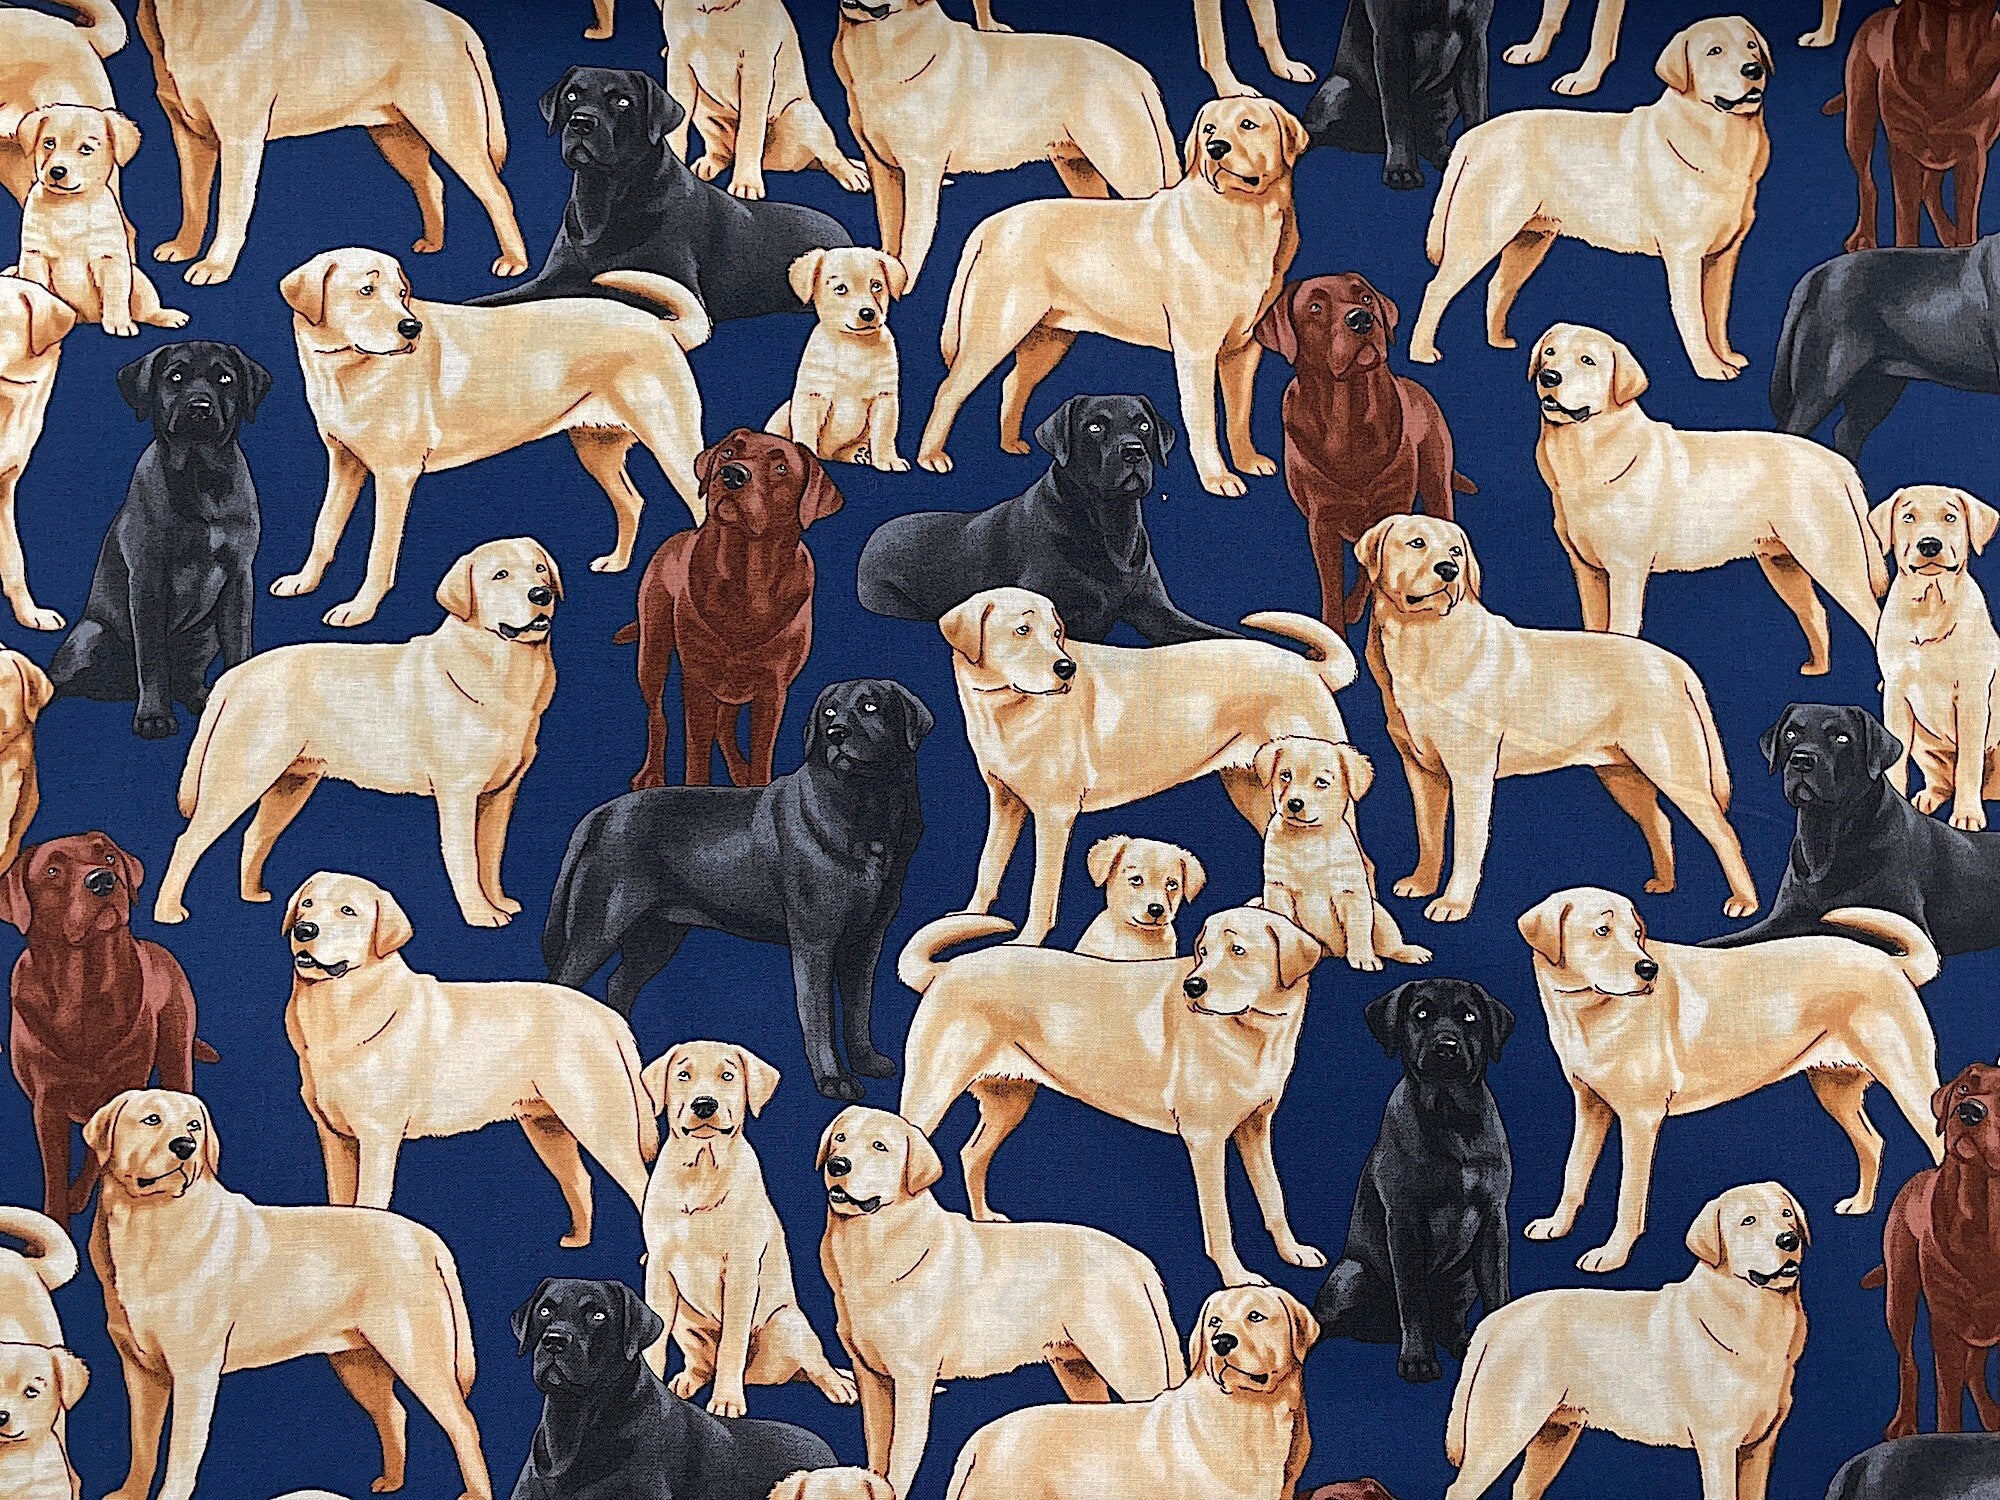 This blue cotton fabric is covered with Labrador Retrievers. The dogs are black, brown and beige.